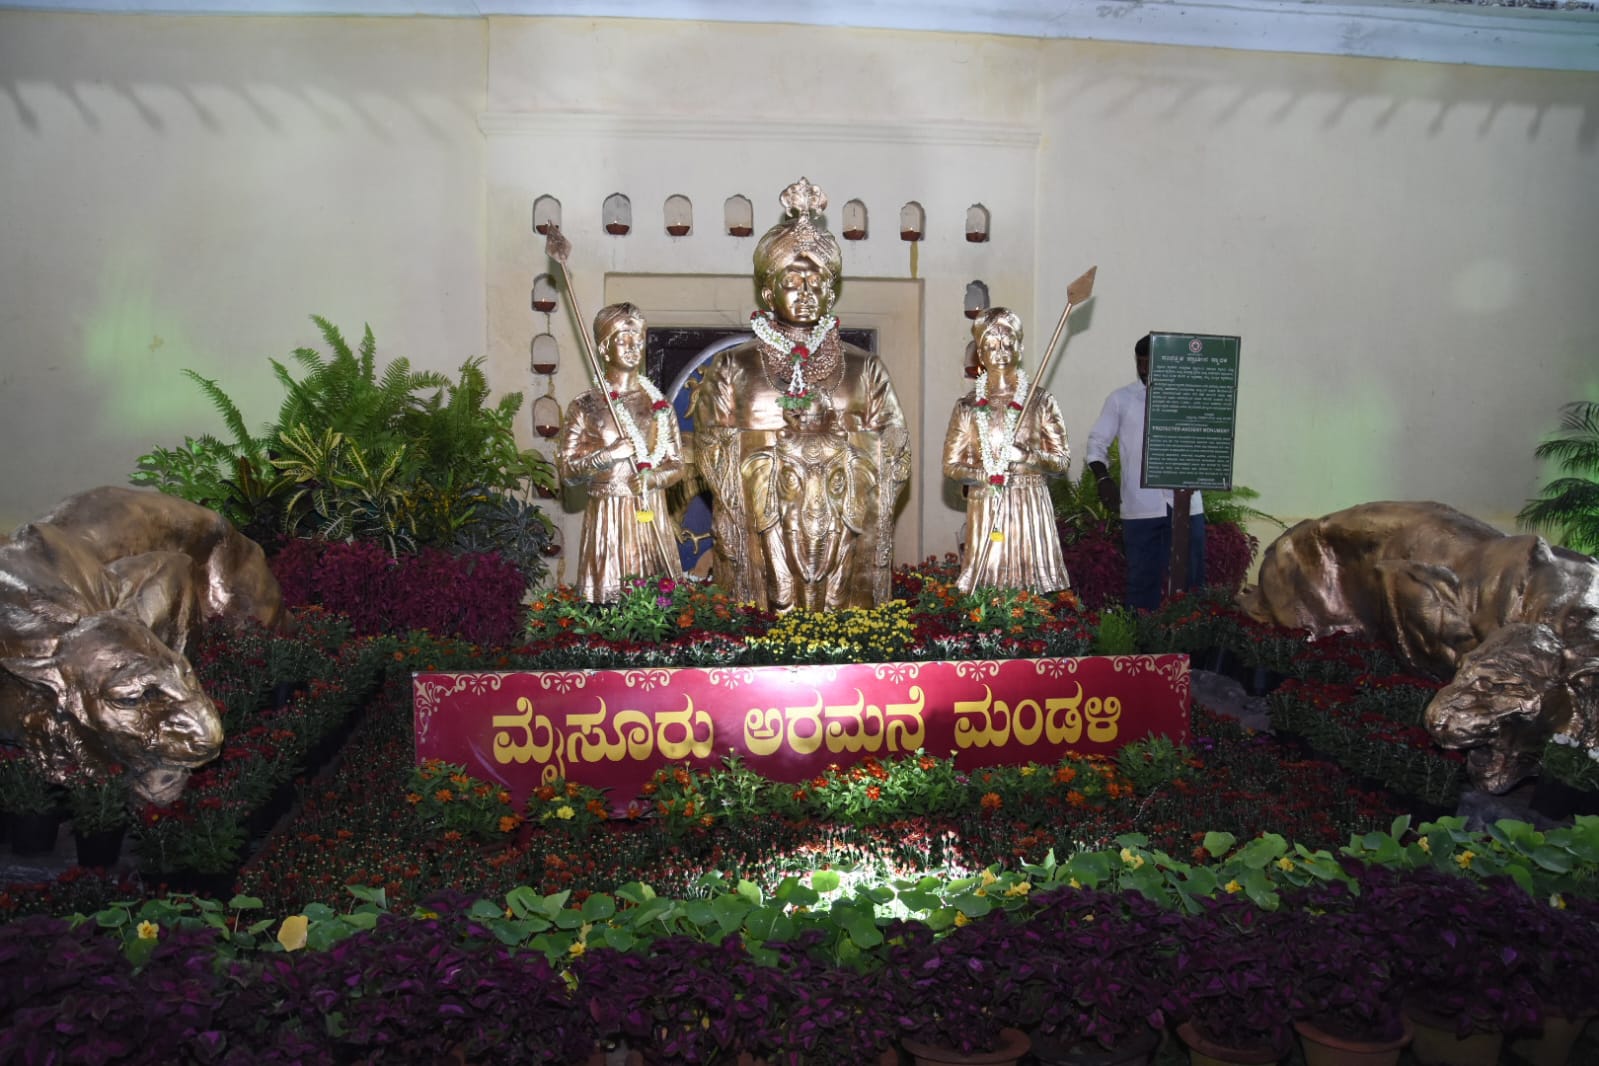 CM Siddaramaiah inaugurated the Palace Flower Show